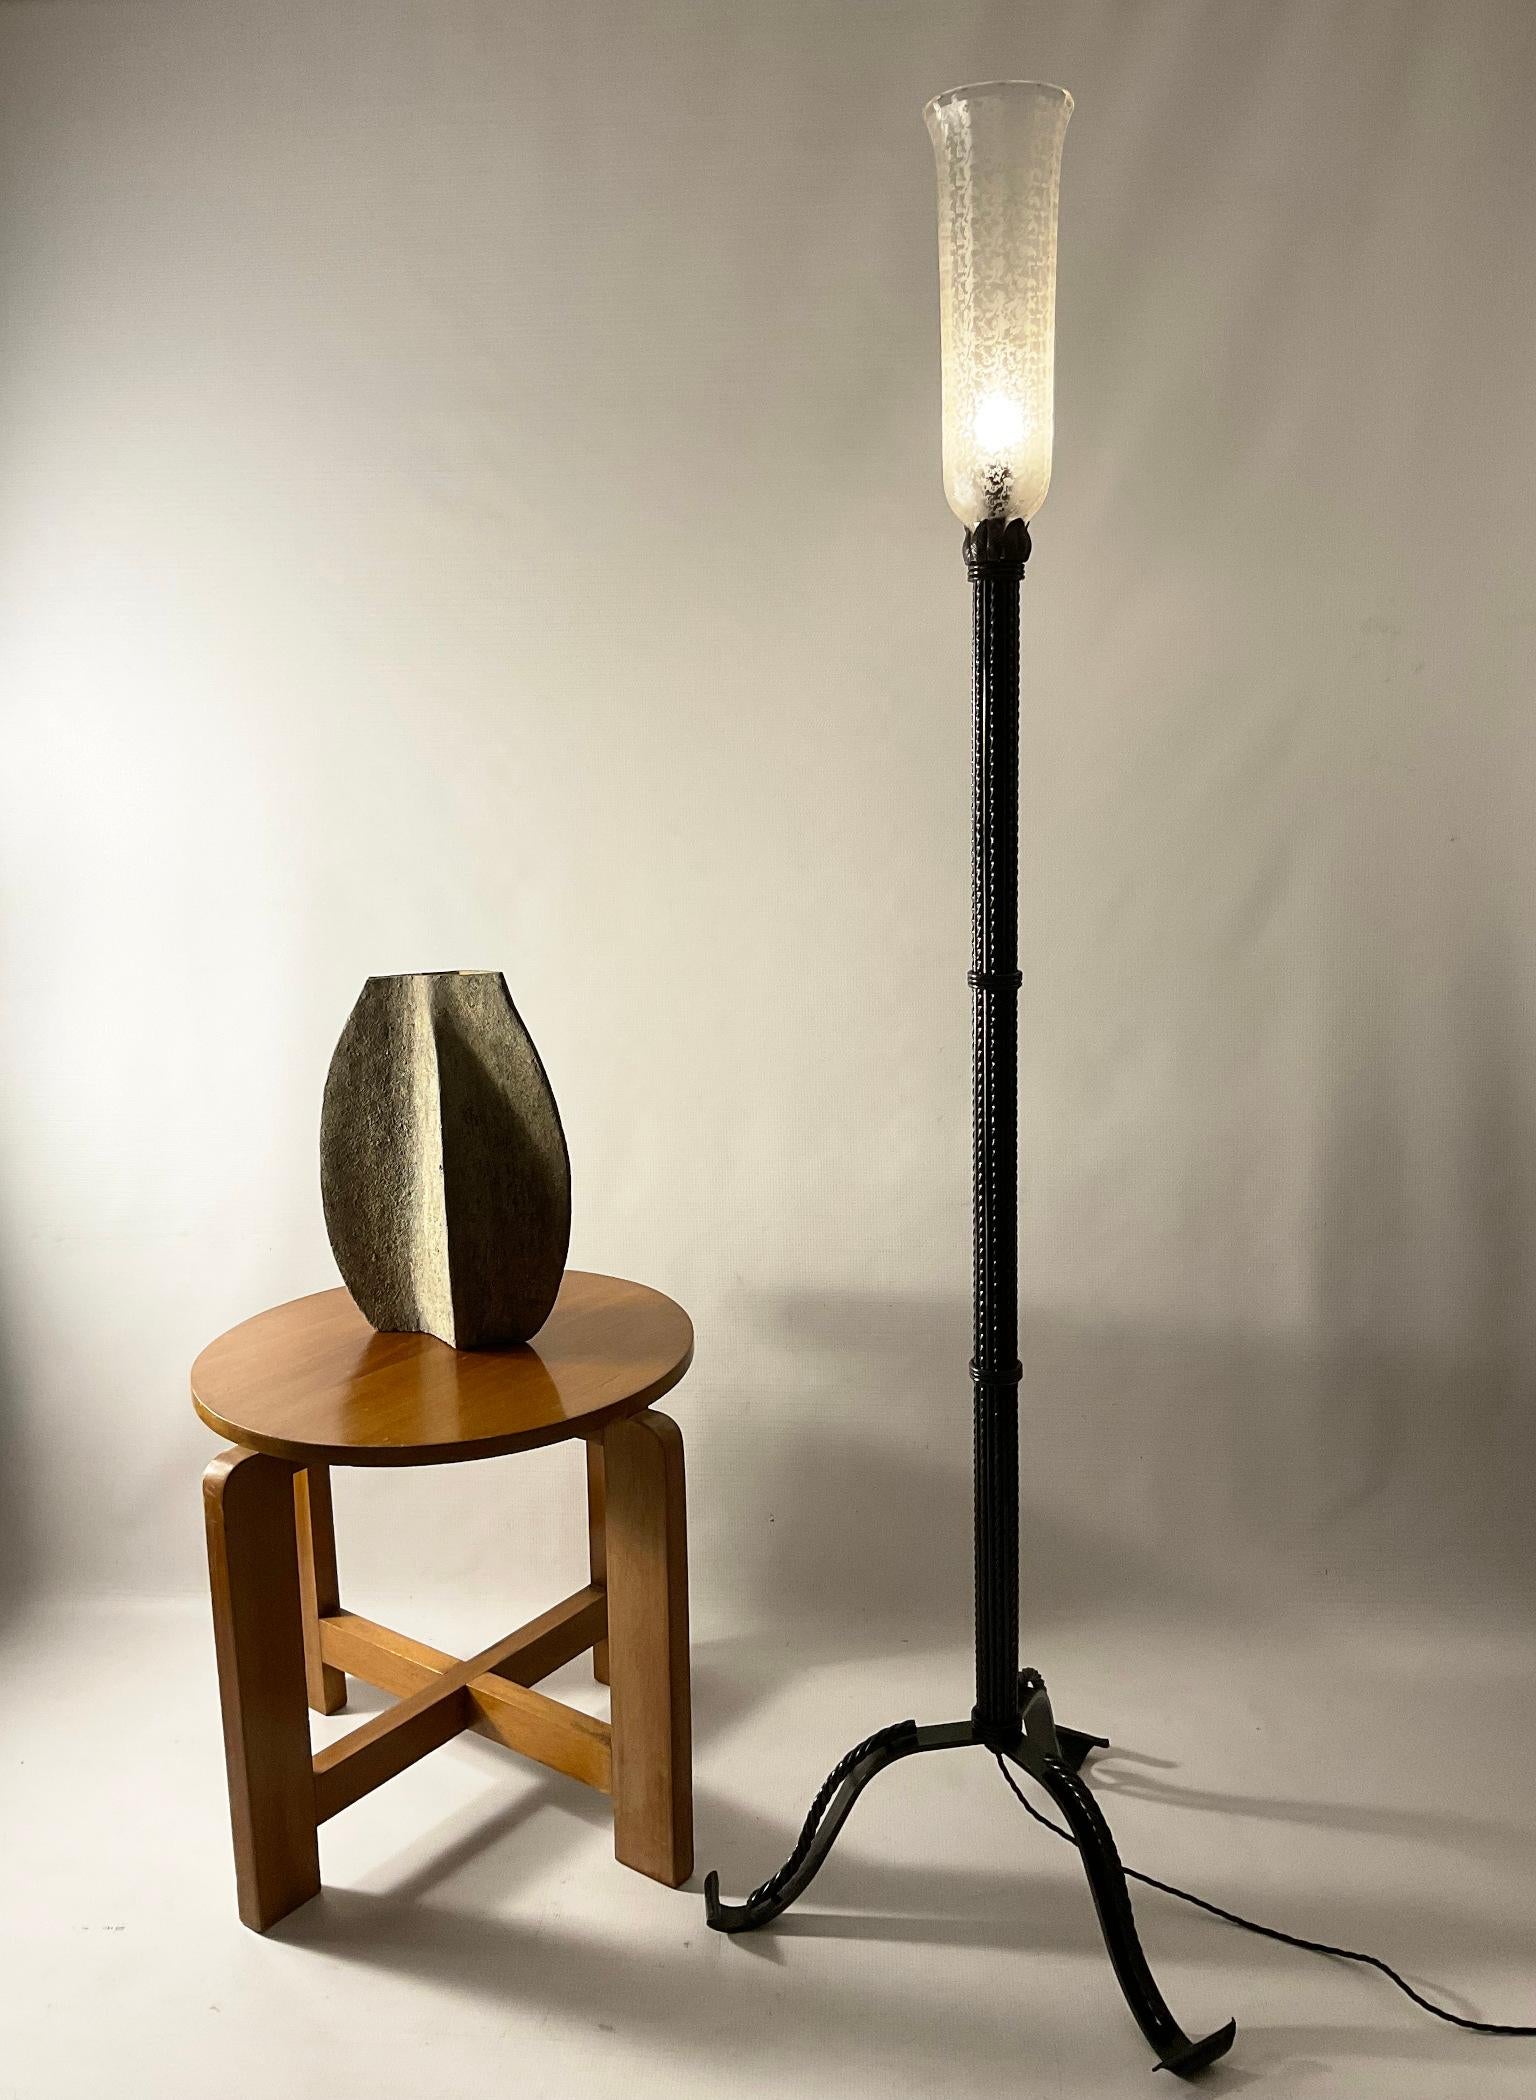 1920s French Art Deco Wrought Iron Floor Lamp with Frosted Glass Shade For Sale 6